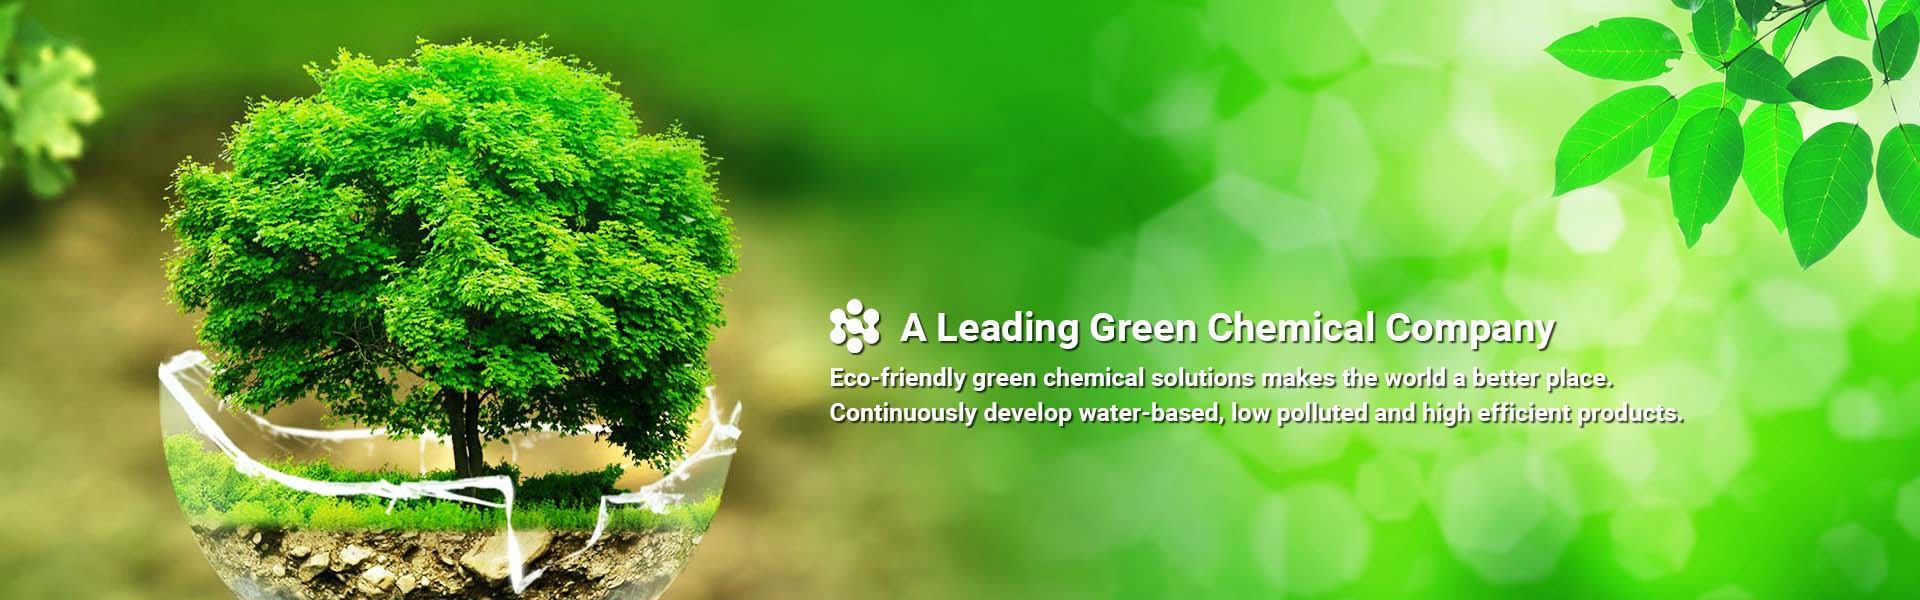 A Leading Green Chemical Company